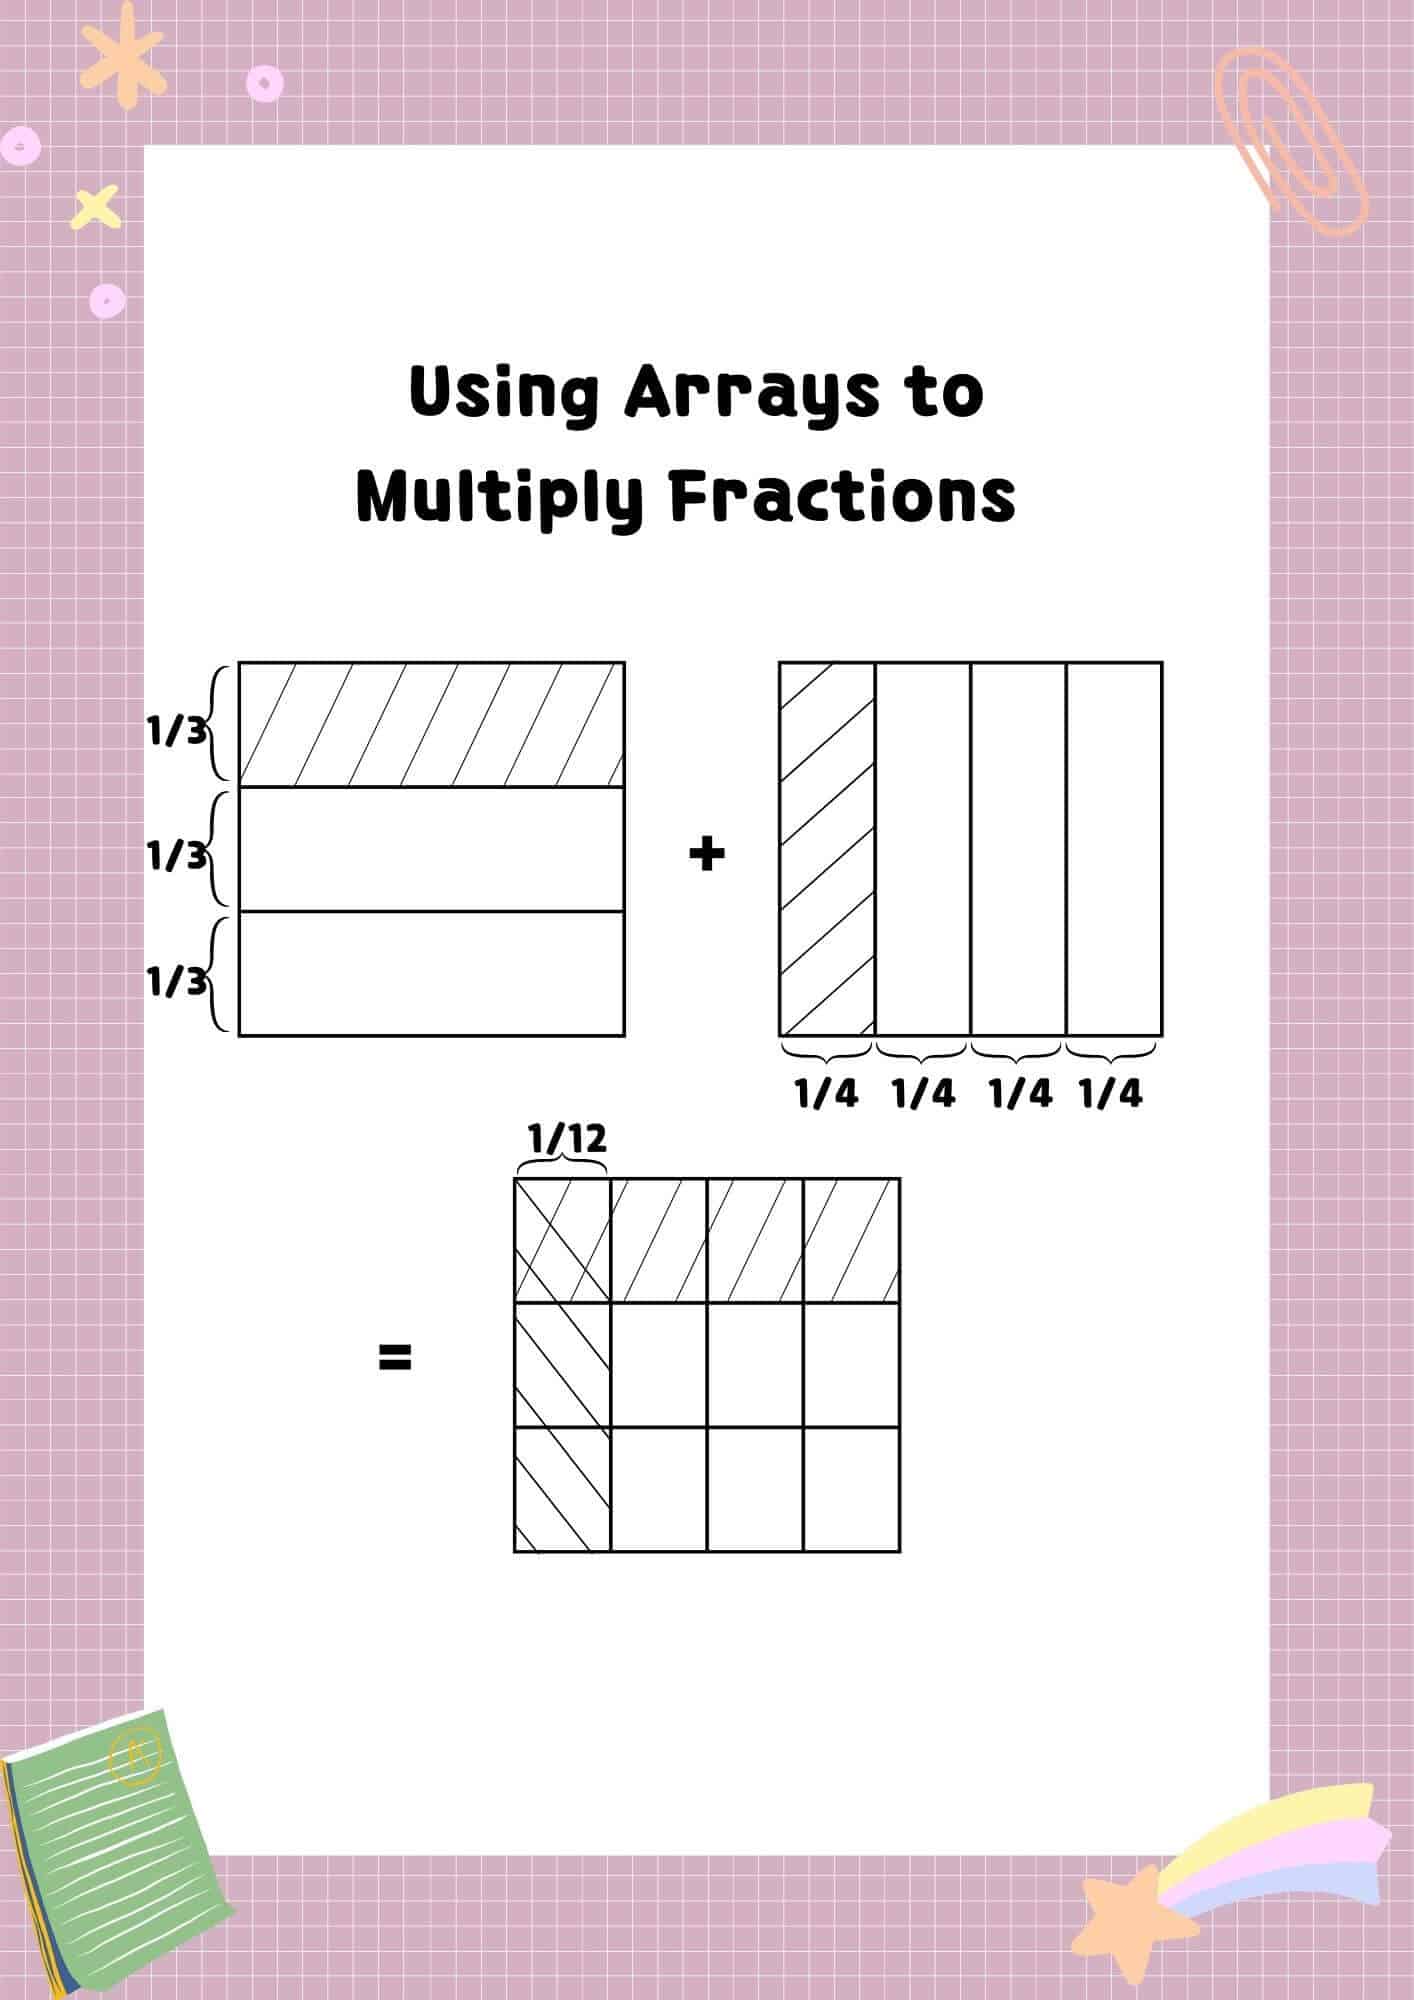 representation of multiplying fractions using arrays